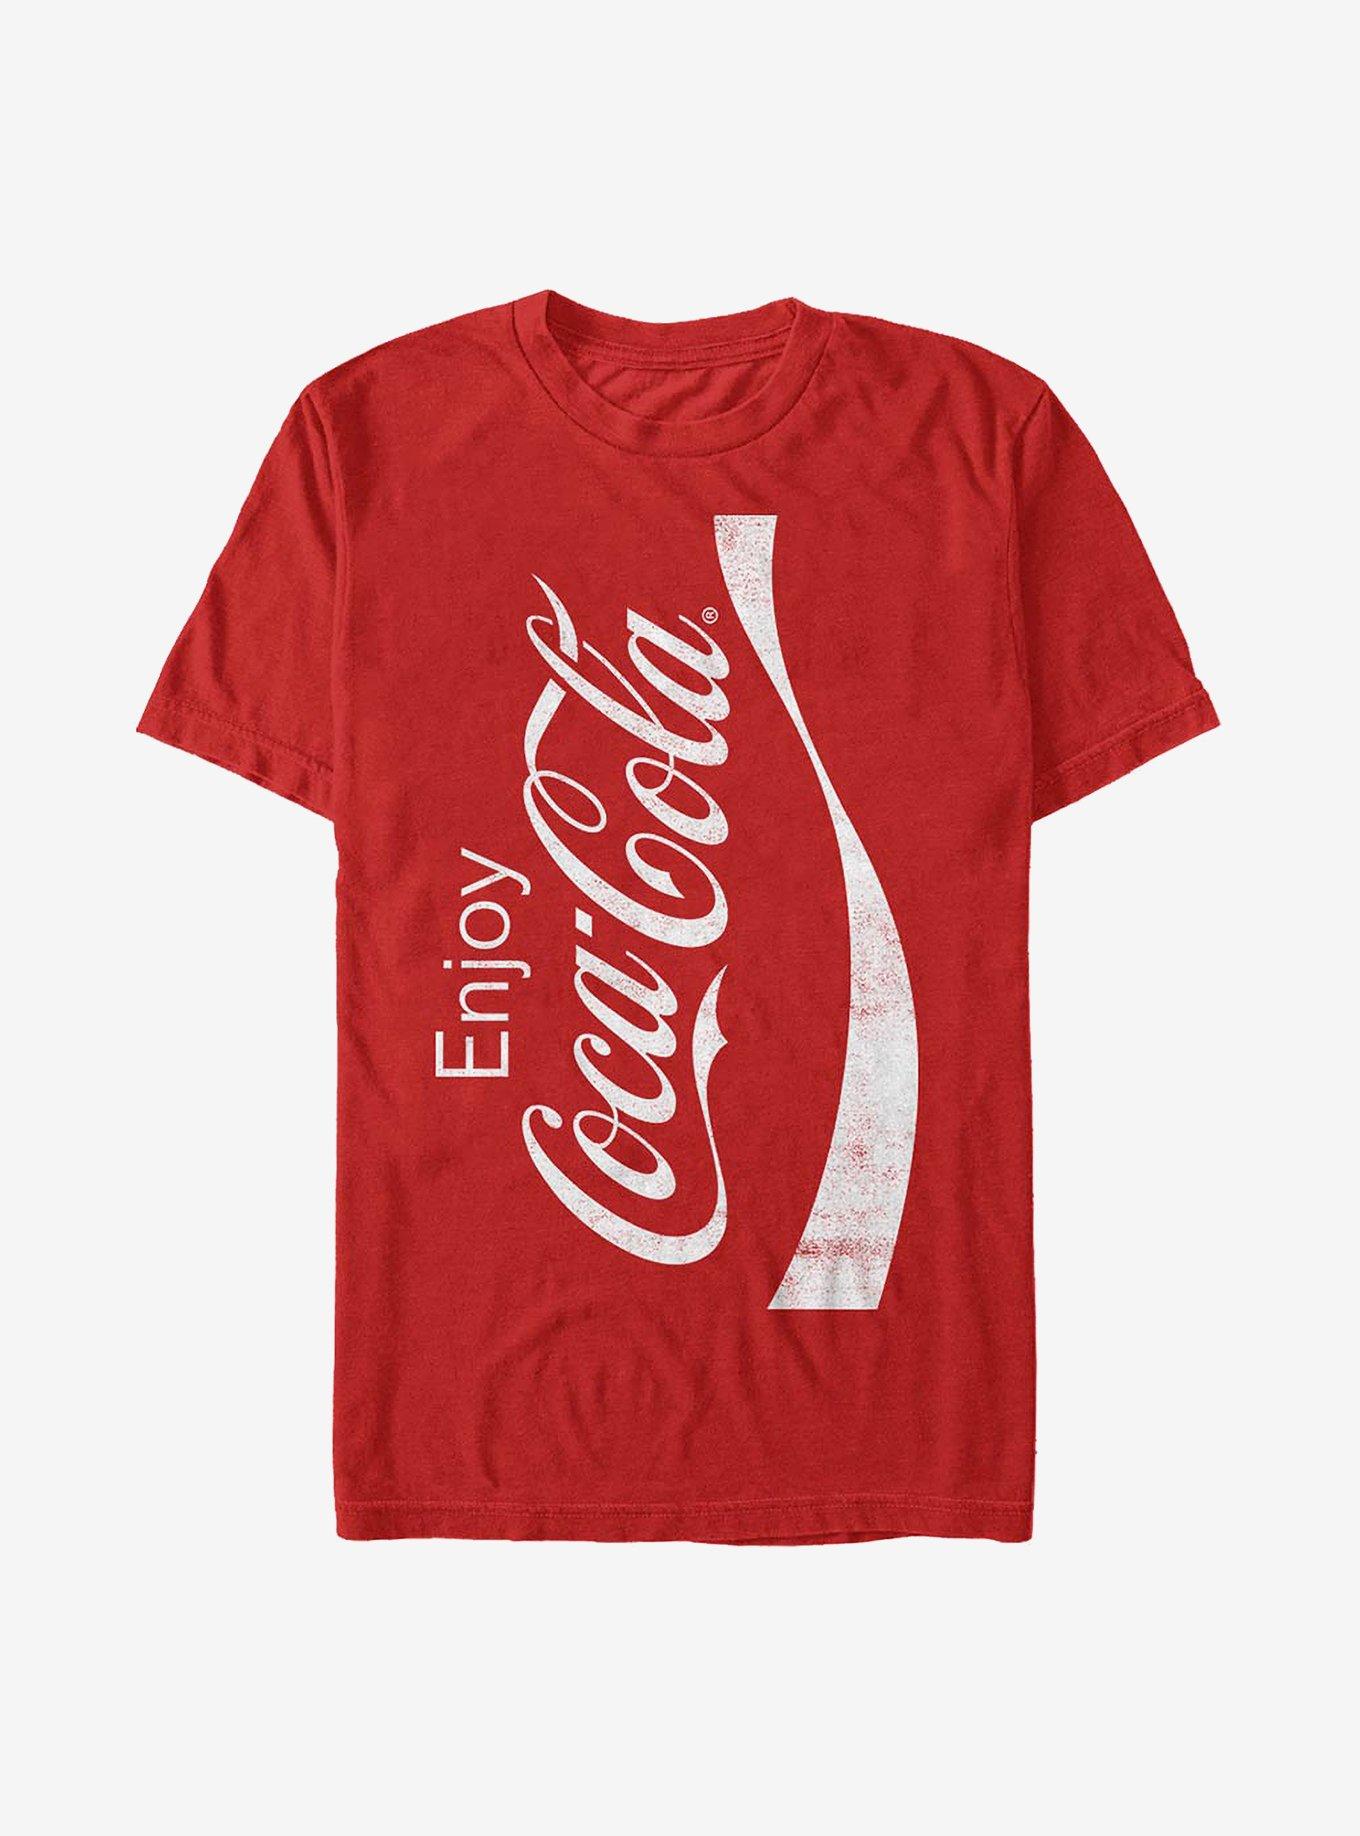 Coke Canned T-Shirt, RED, hi-res